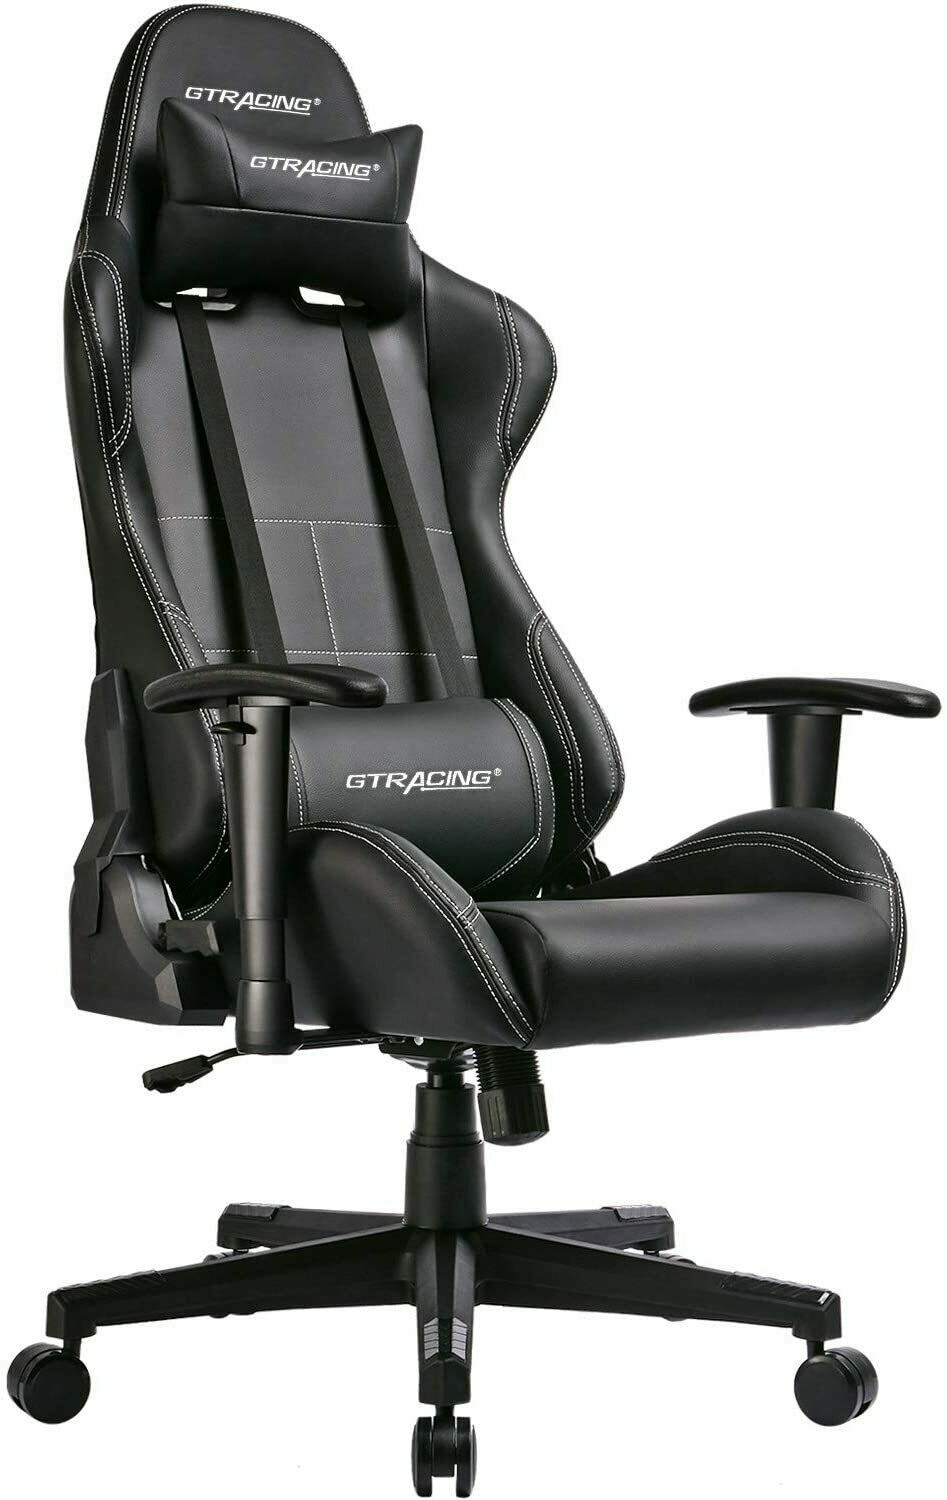 Gaming Chair Racing Office Computer Game Chair Ergonomic Backrest and Seat Height Adjustment Recliner Swivel Rocker with Headrest and Lumbar Pillow Black color